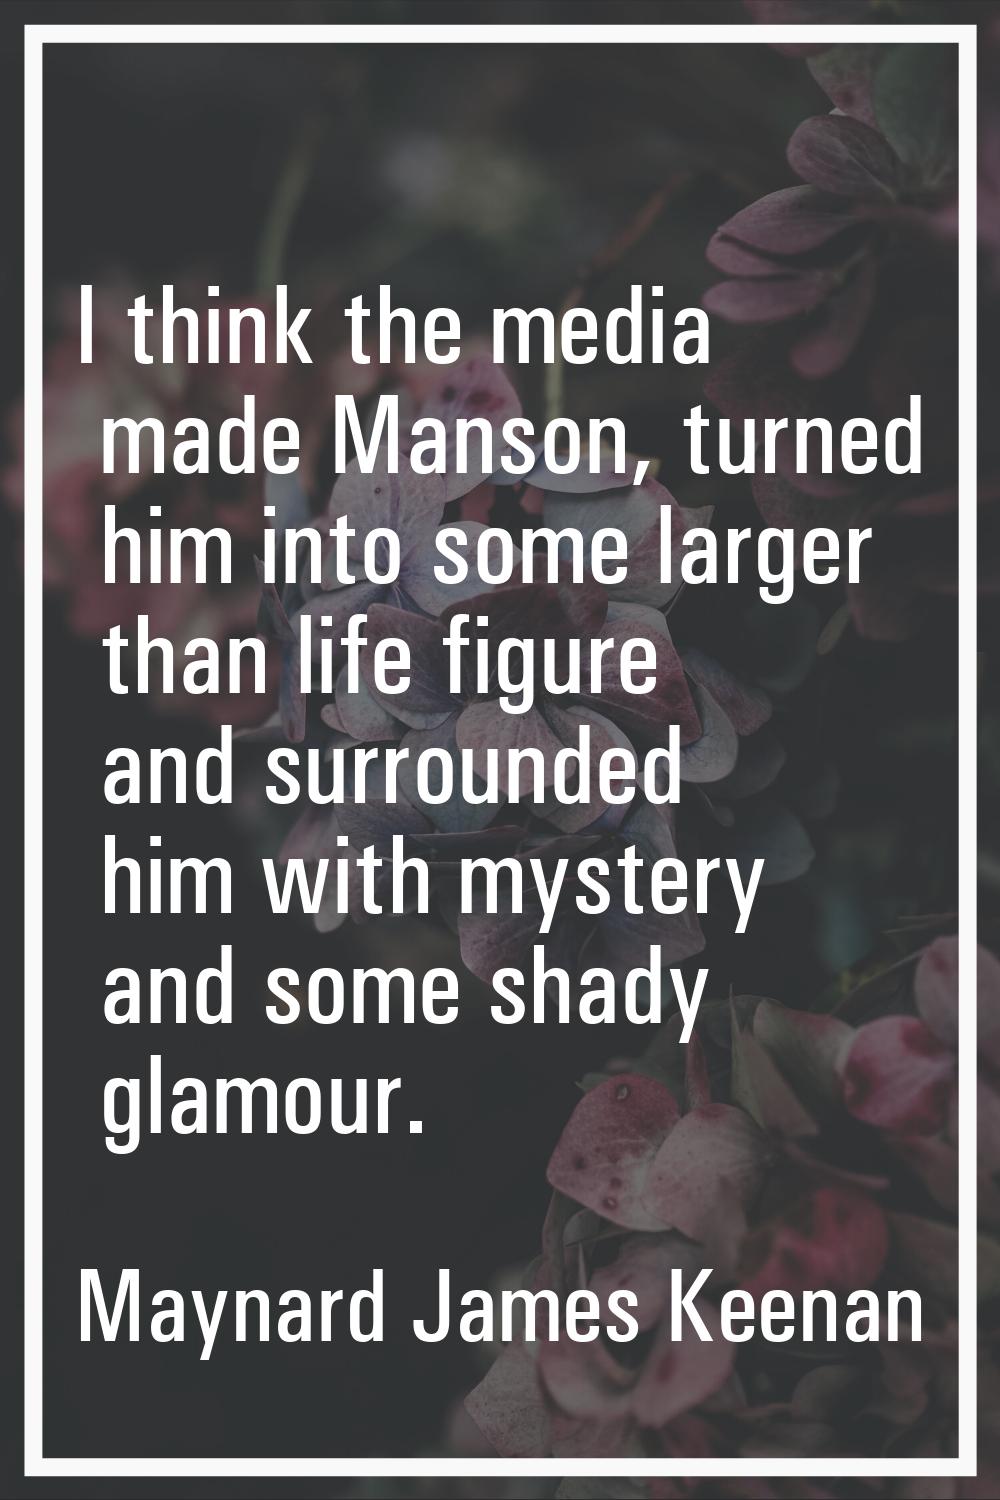 I think the media made Manson, turned him into some larger than life figure and surrounded him with